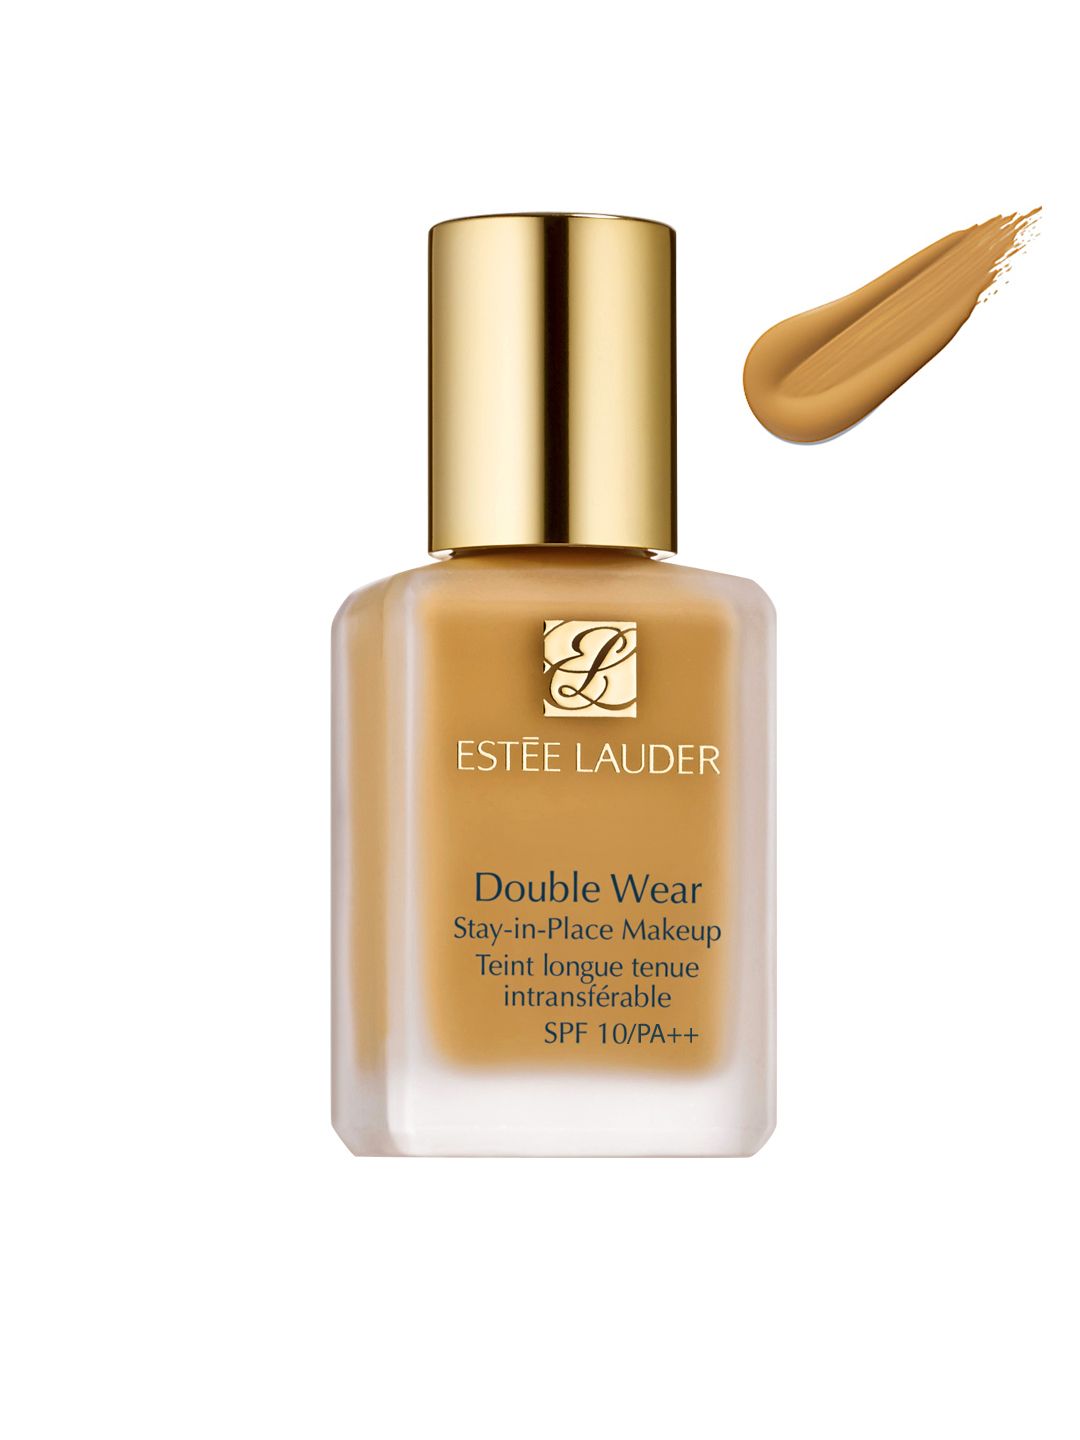 Estee Lauder Sand Double Wear Stay-in-Place Makeup with SPF 10 Price in India